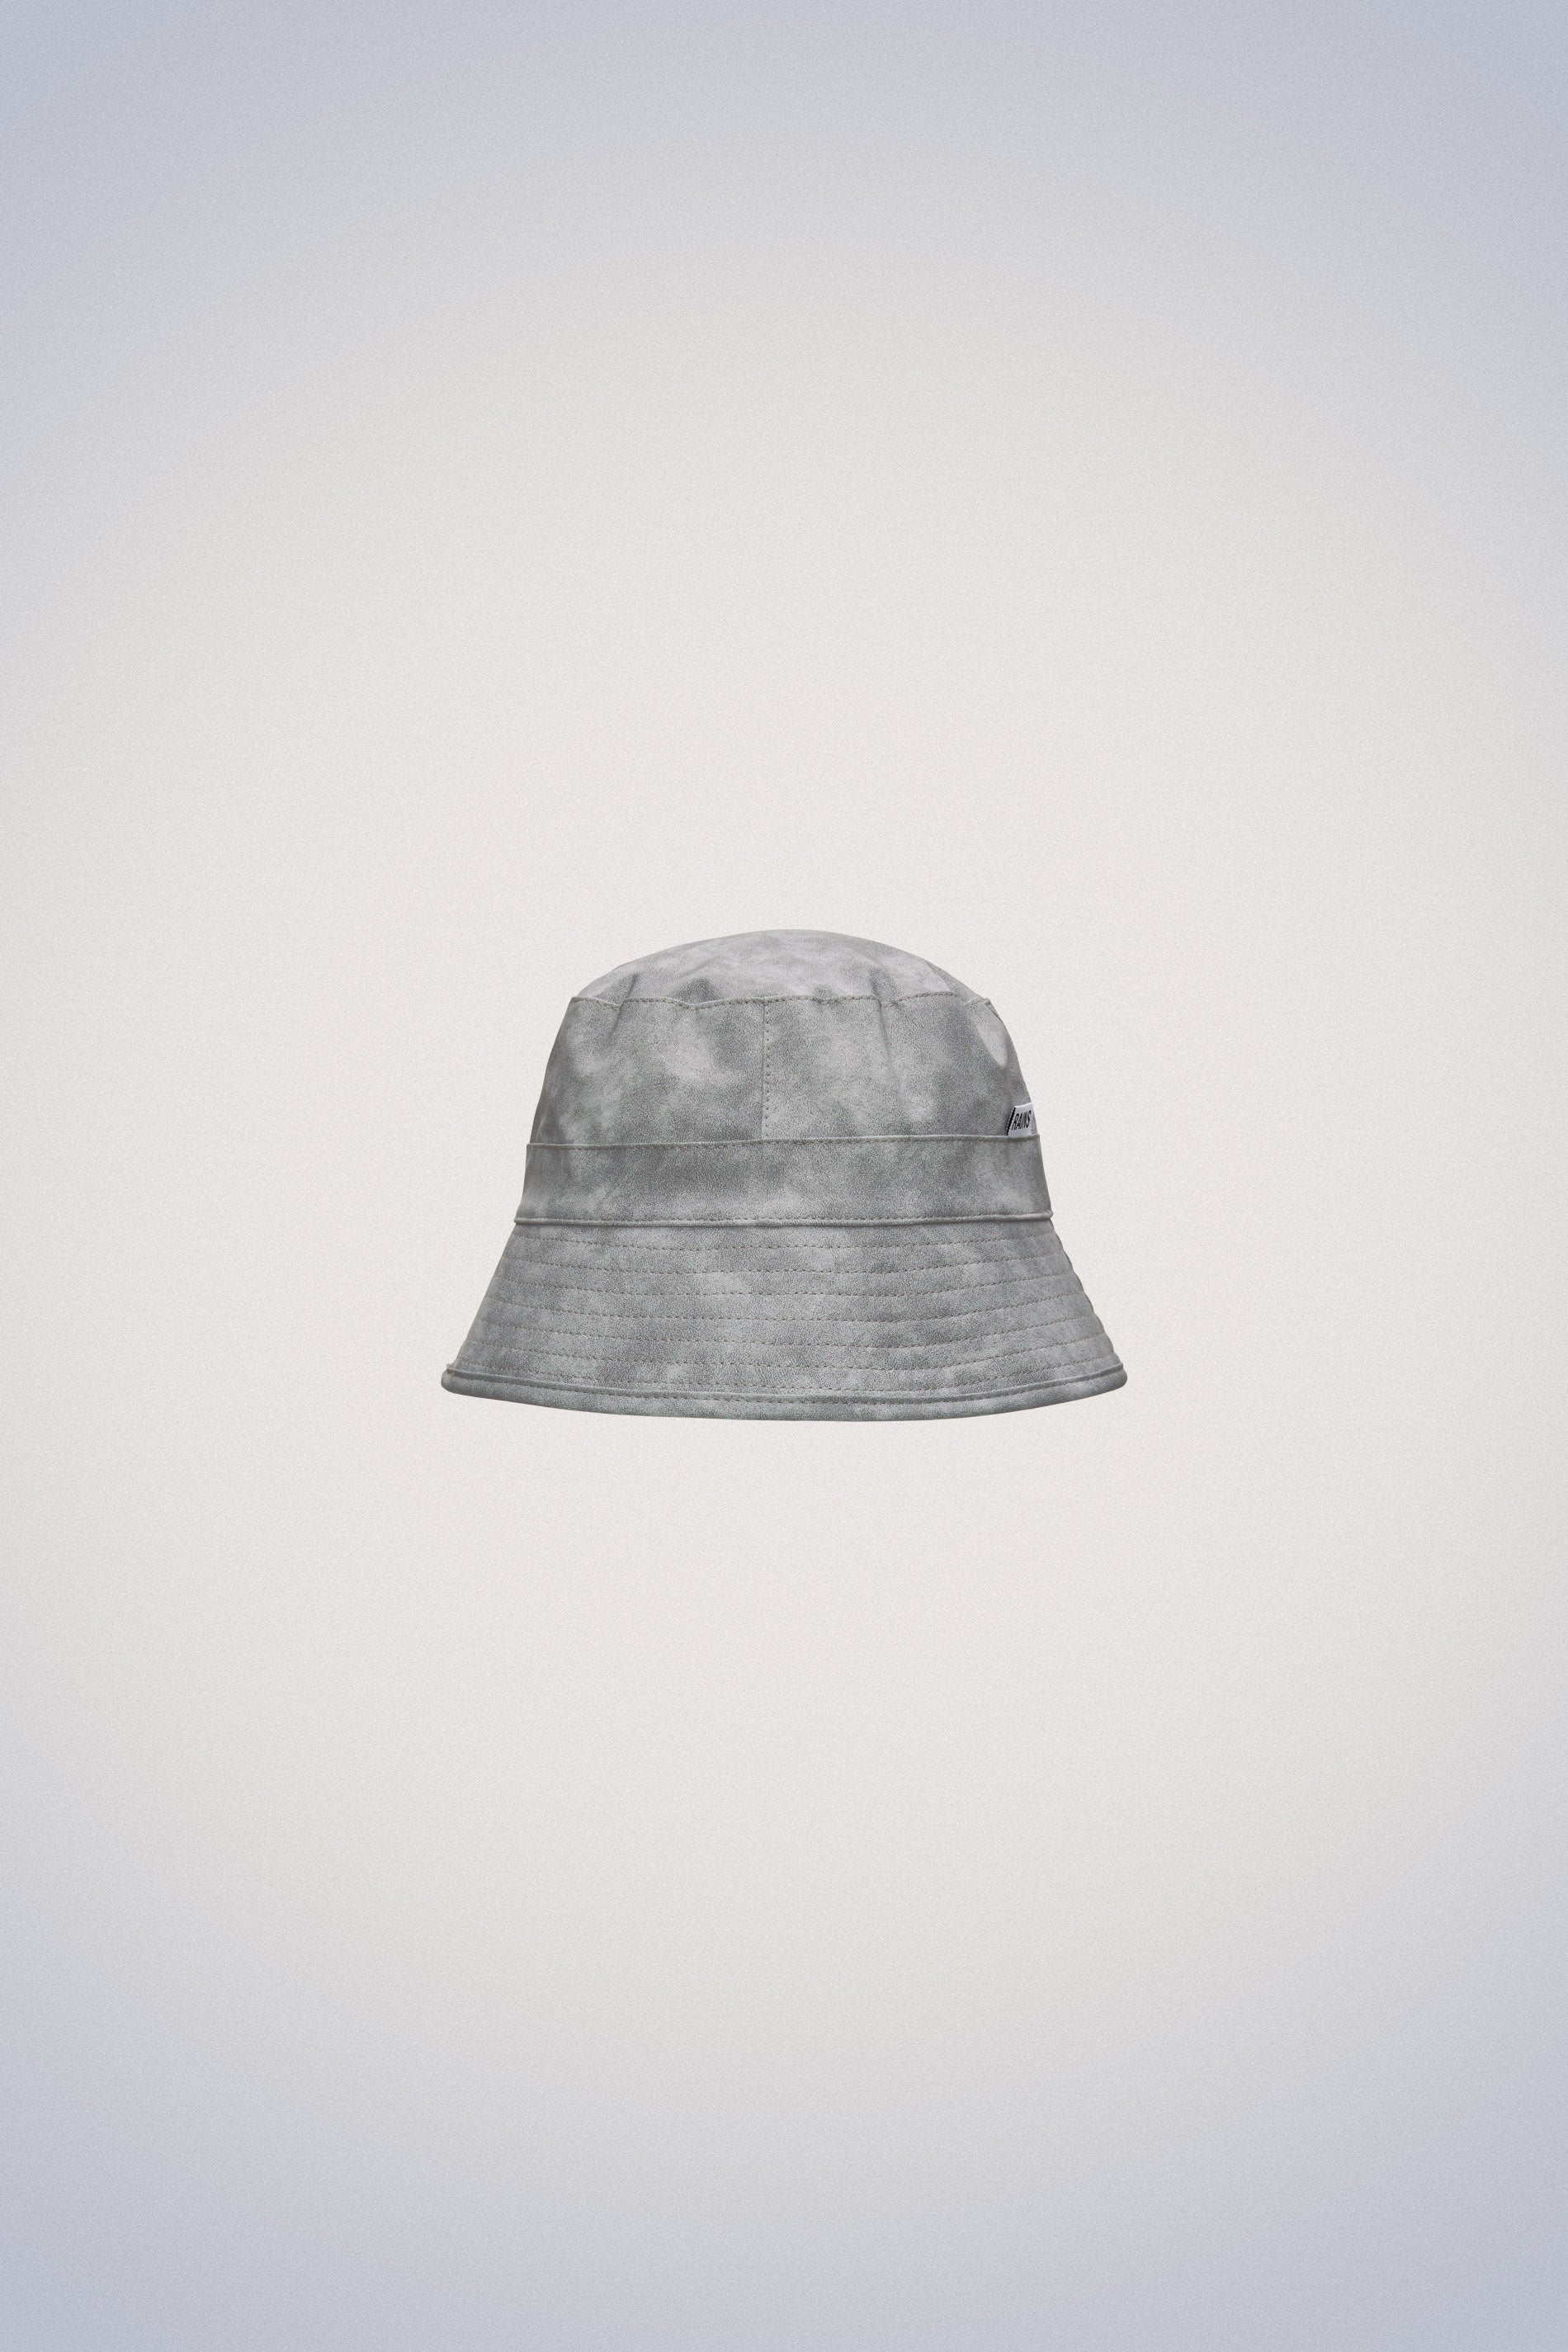 Rains® Bucket Hat in Green for $37